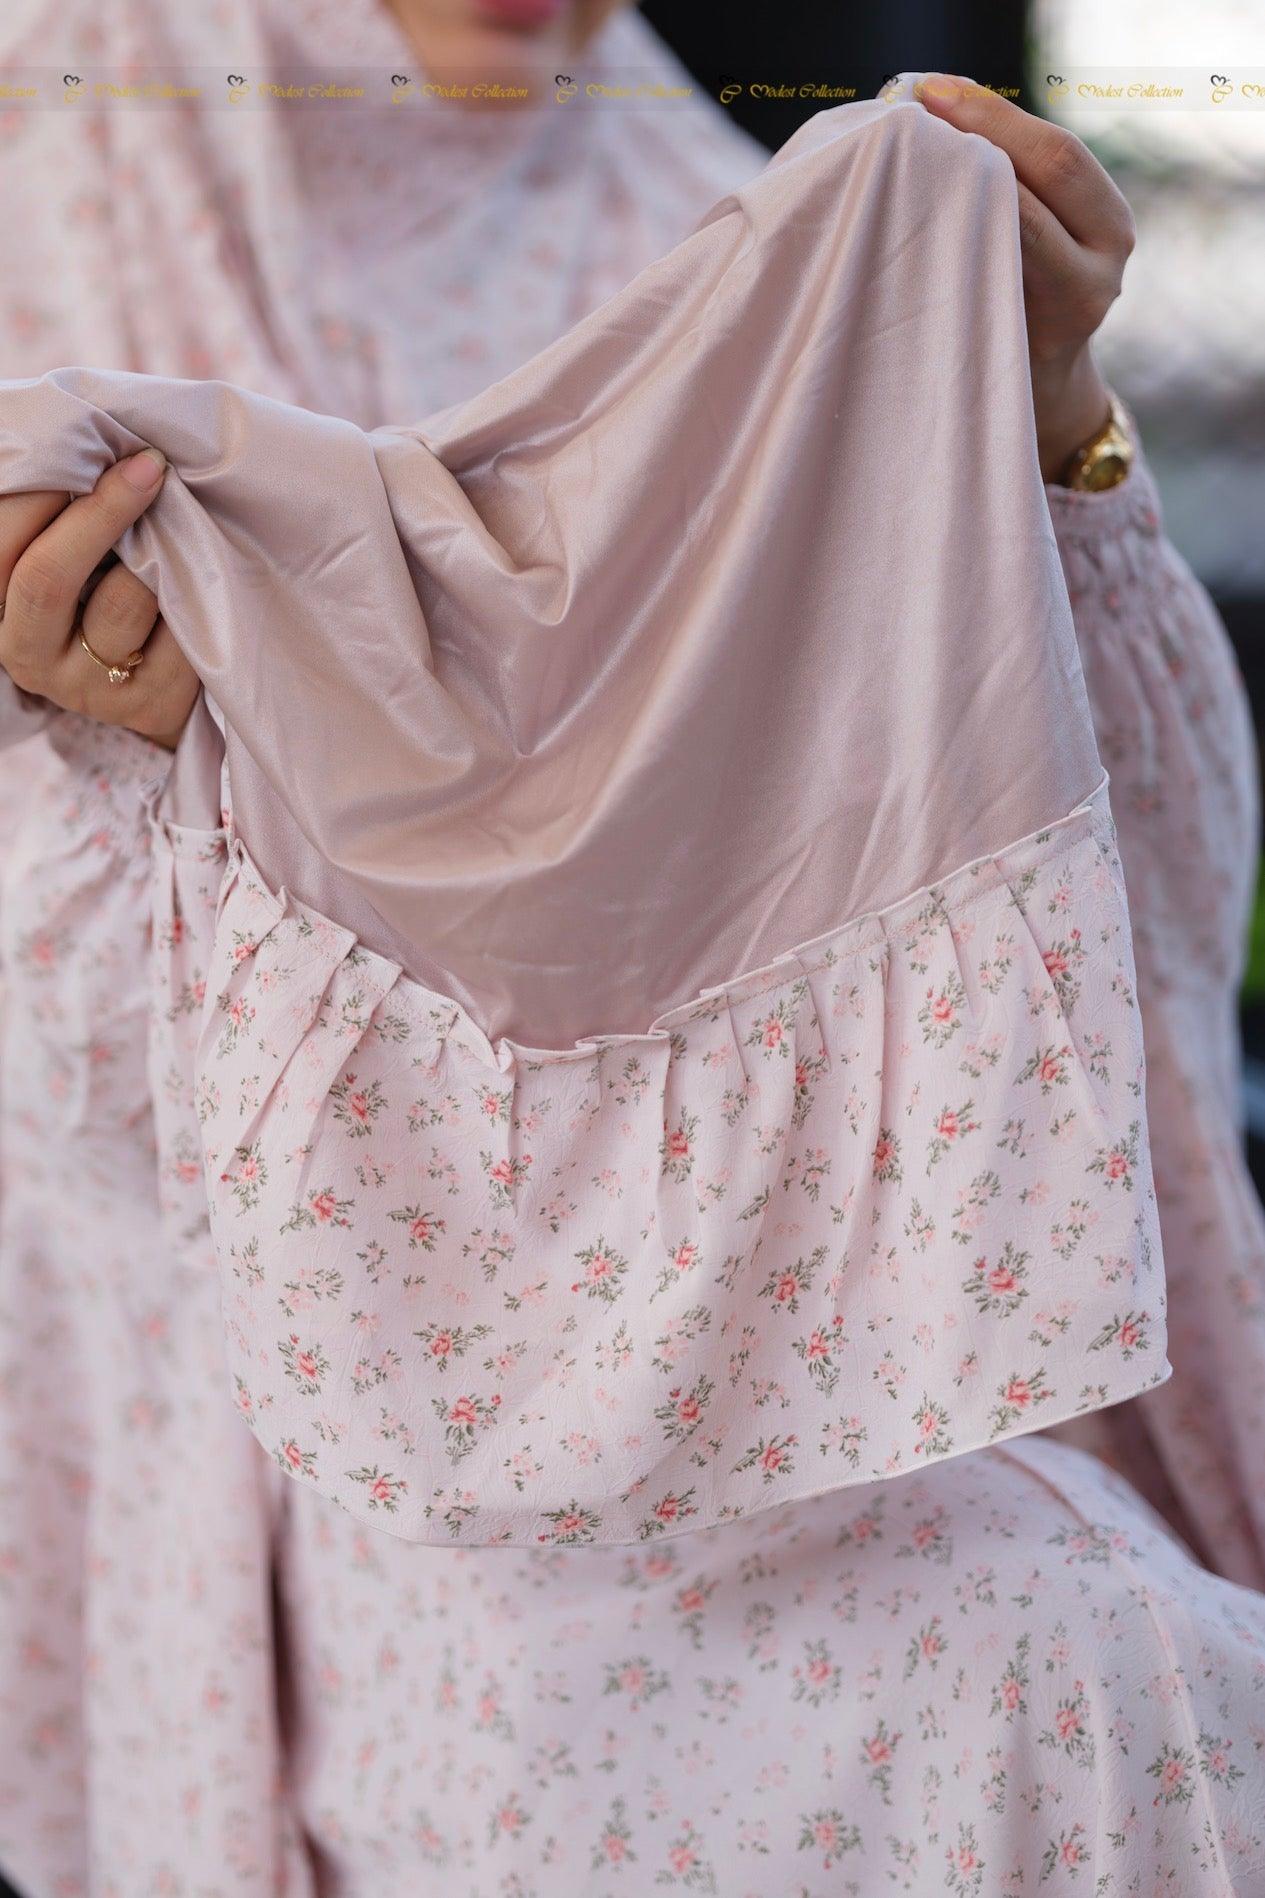 Baby Hijab Peach Floral - Modest Collection